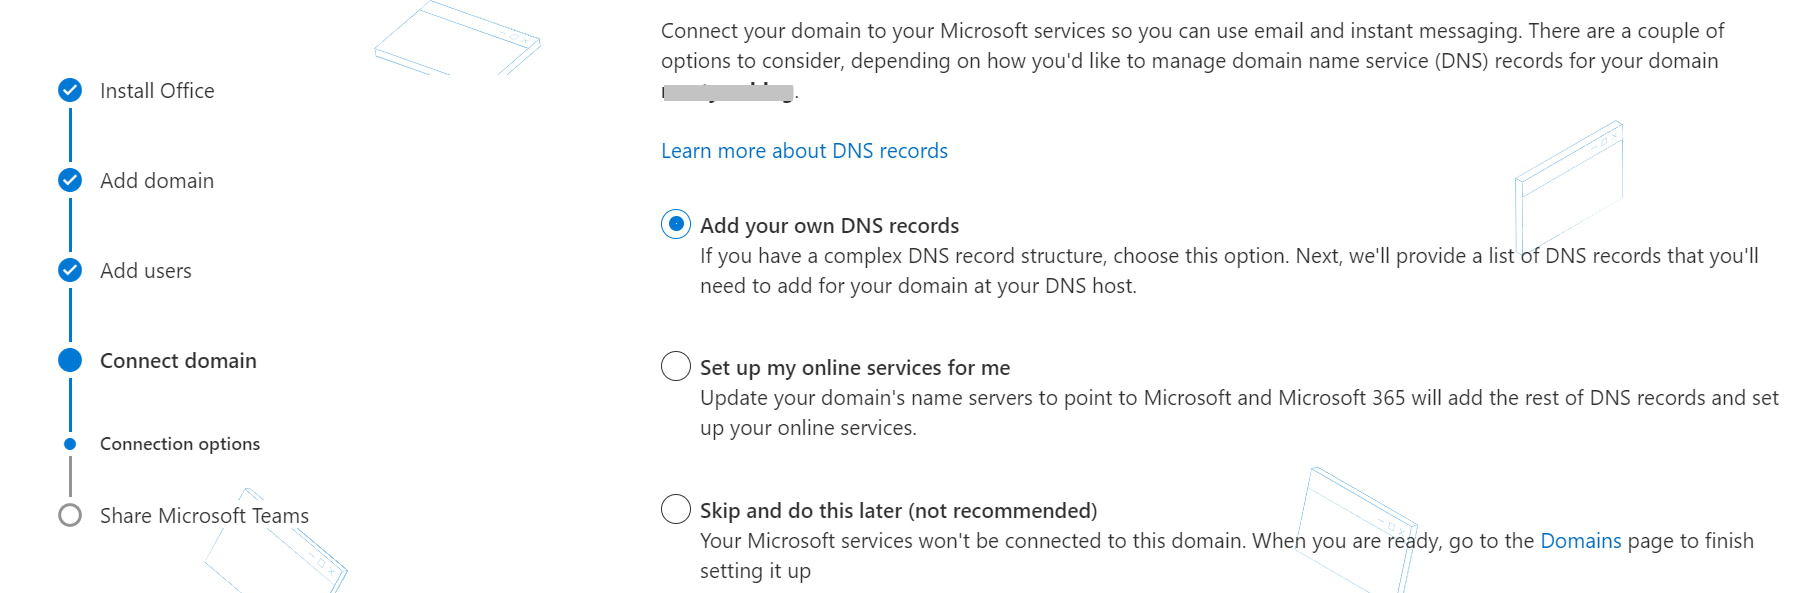 Setting up online services with Office 365.